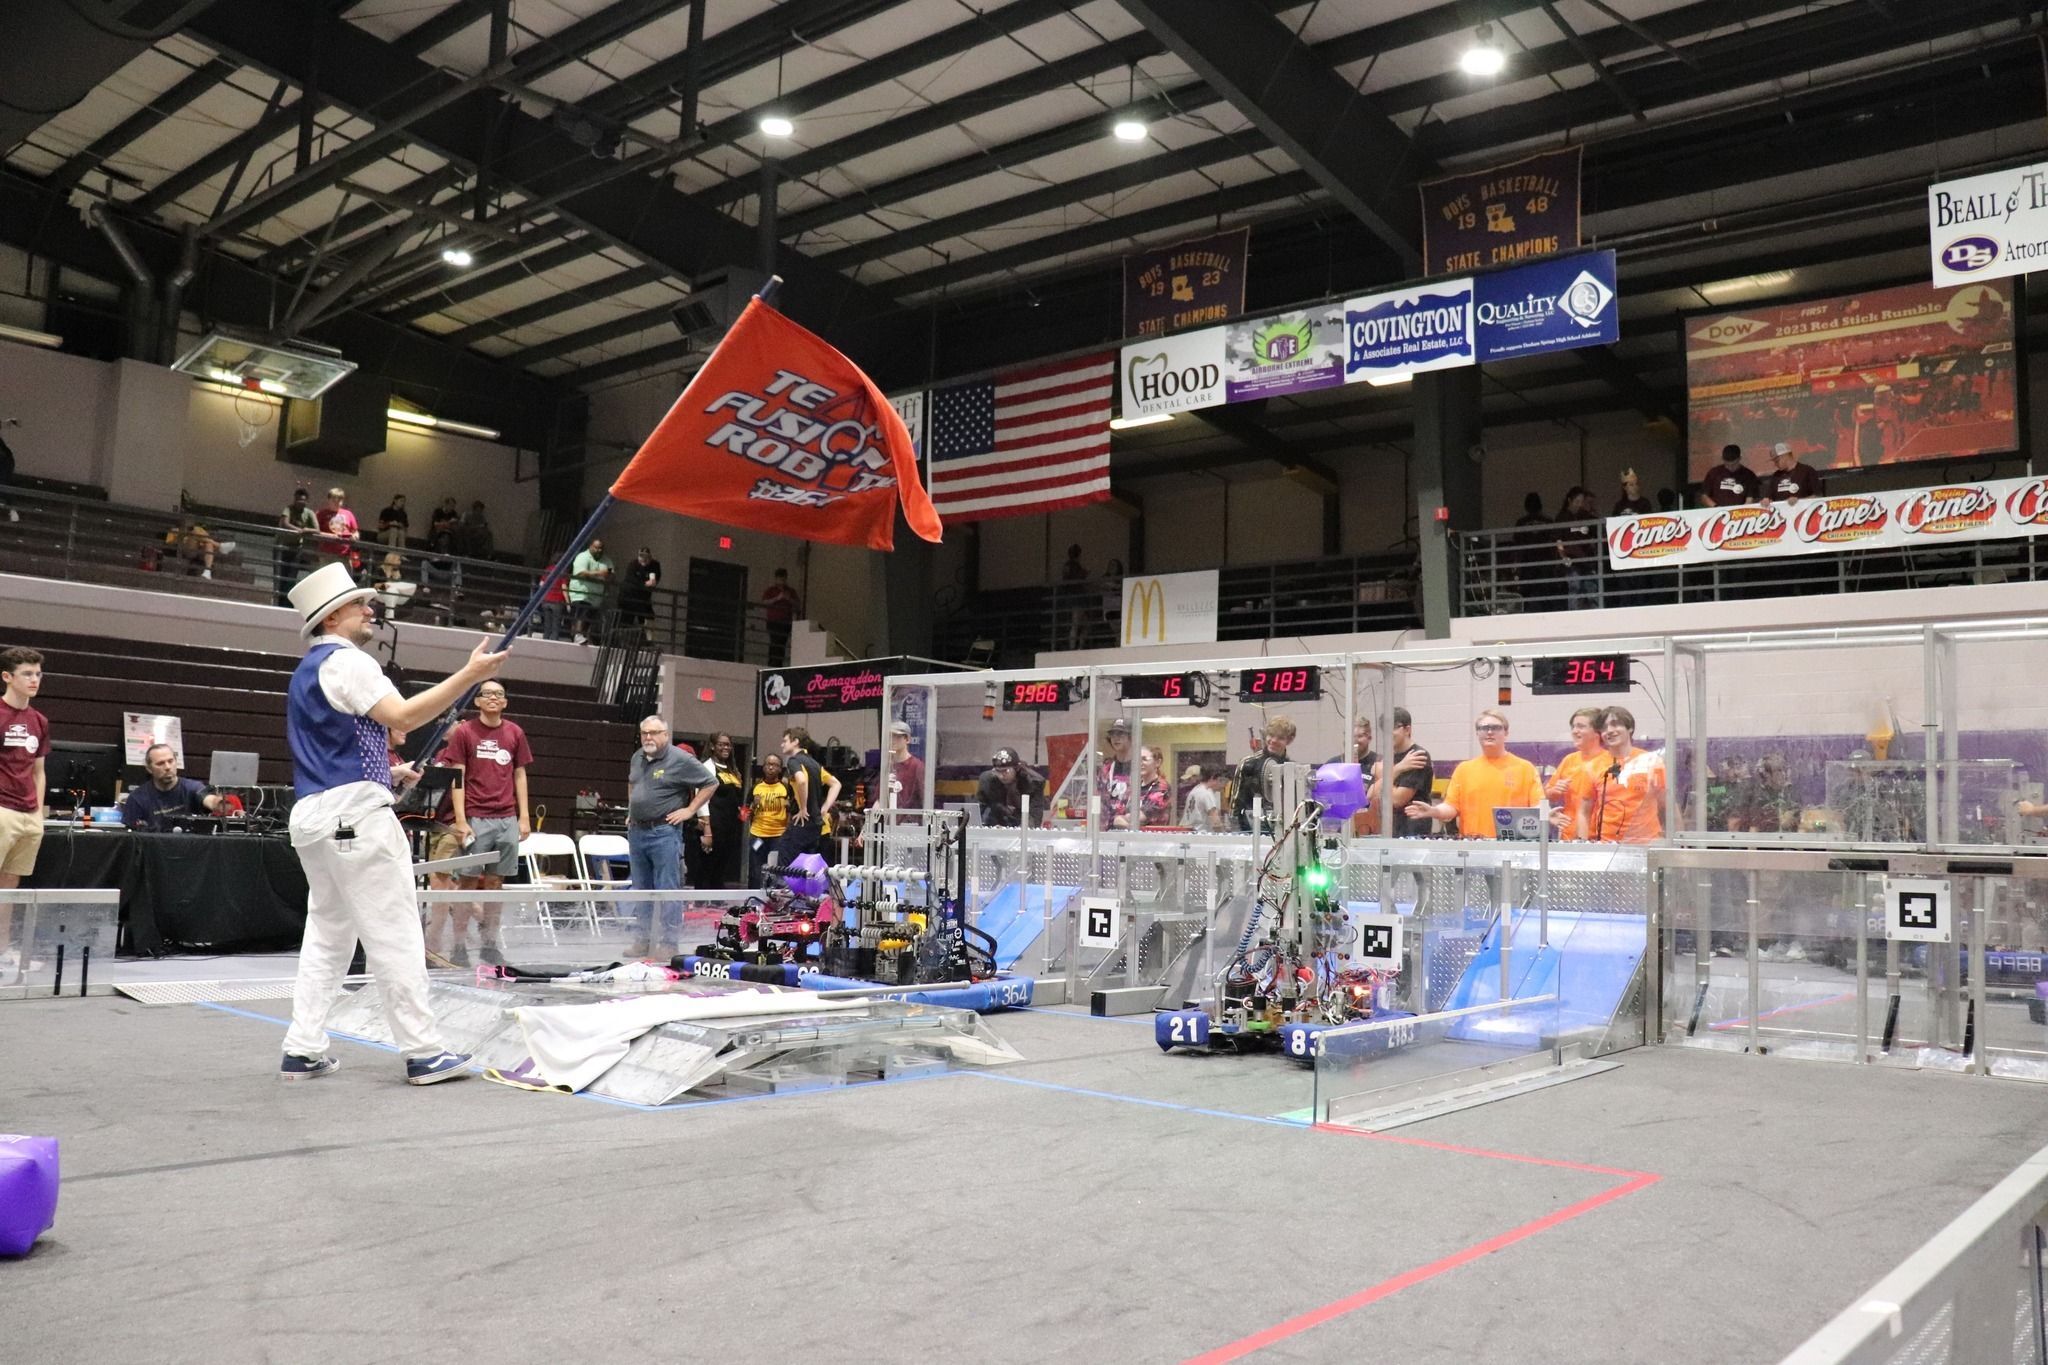 Dow Red Stick Rumble: A Decade of Robotics Excellence and STEM Education